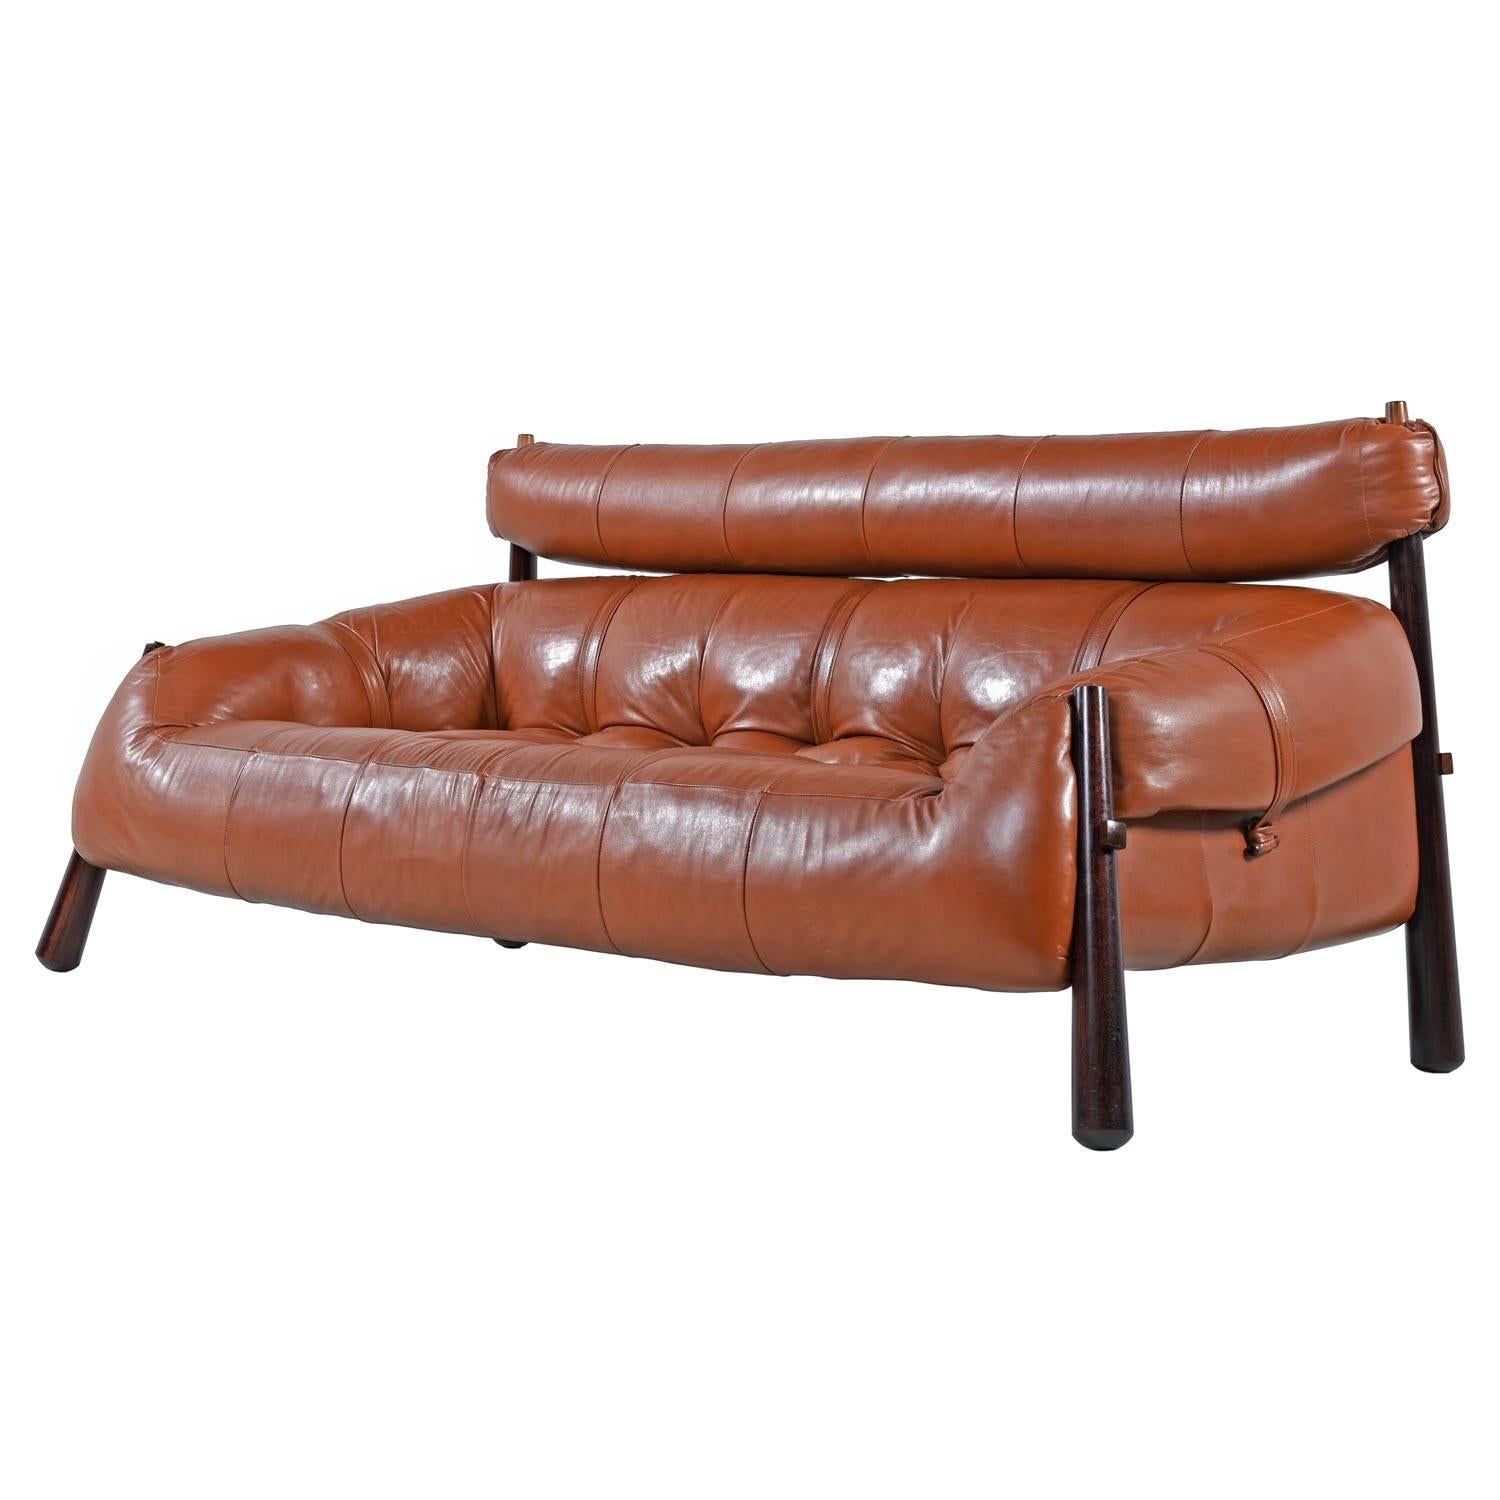 This sofa is even more comfortable than it looks. Nestle into the deep tufted seats and put your head back into the soft, supple leather. Impeccably crafted and beautifully designed, hand-tufted and complete with removable headrest. Solid rosewood